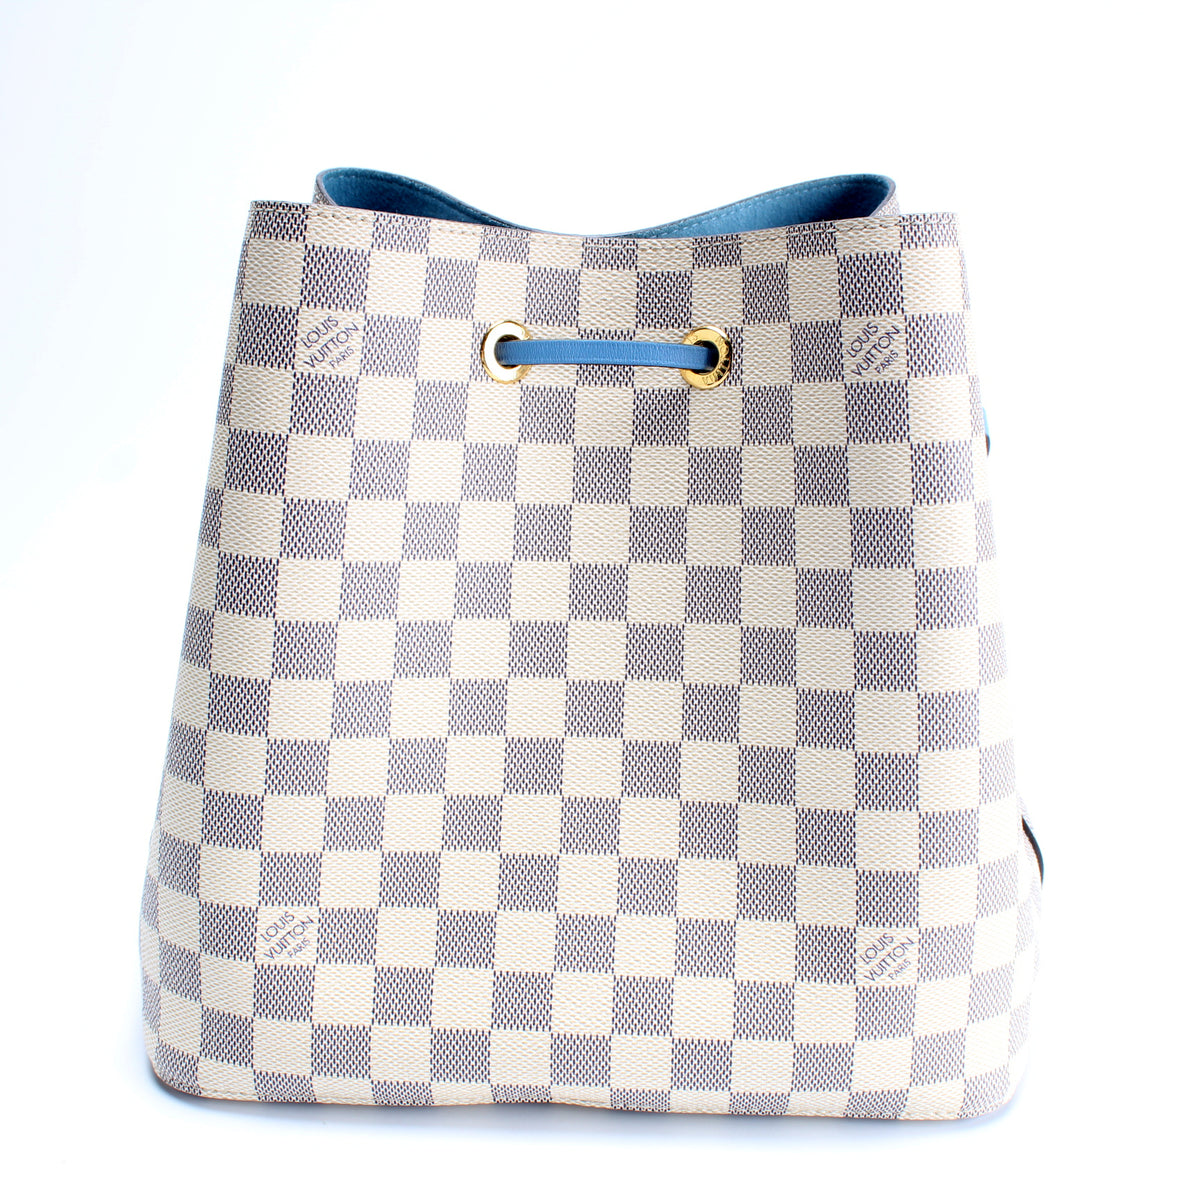 Louis Vuitton Neonoe BB Damier Azur/Pink in Coated Canvas/Leather